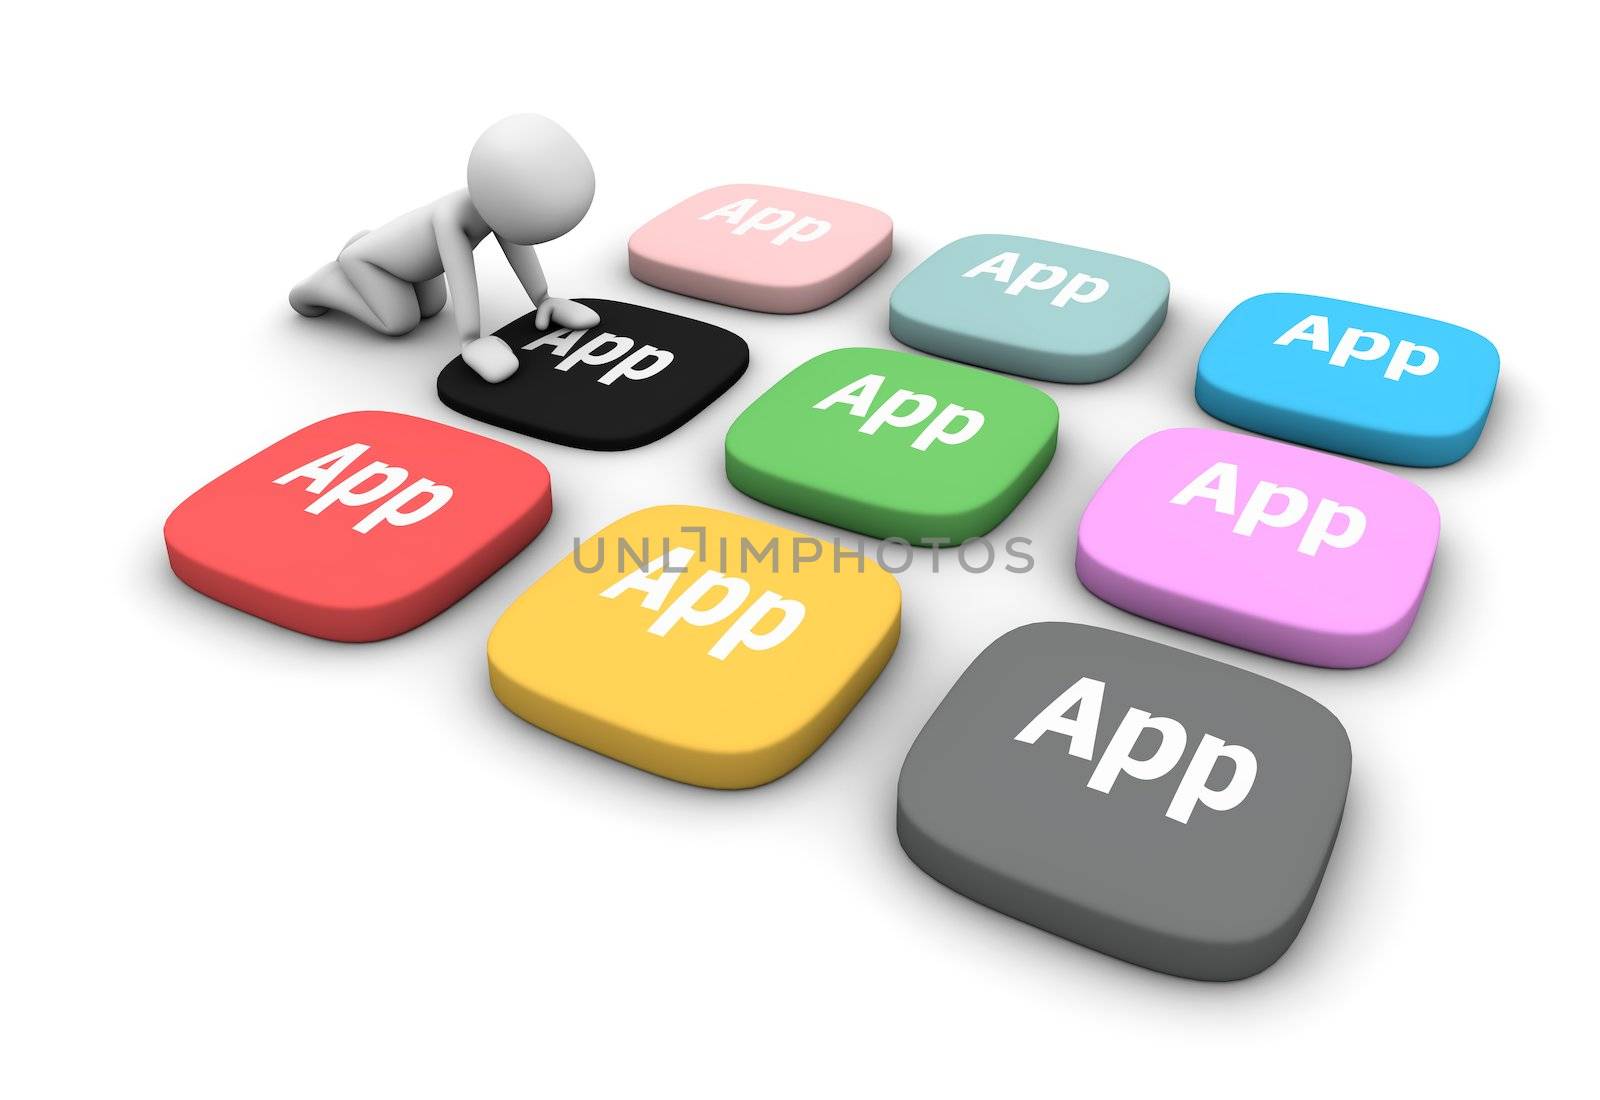 Apps are the software applications on today's mobile devices